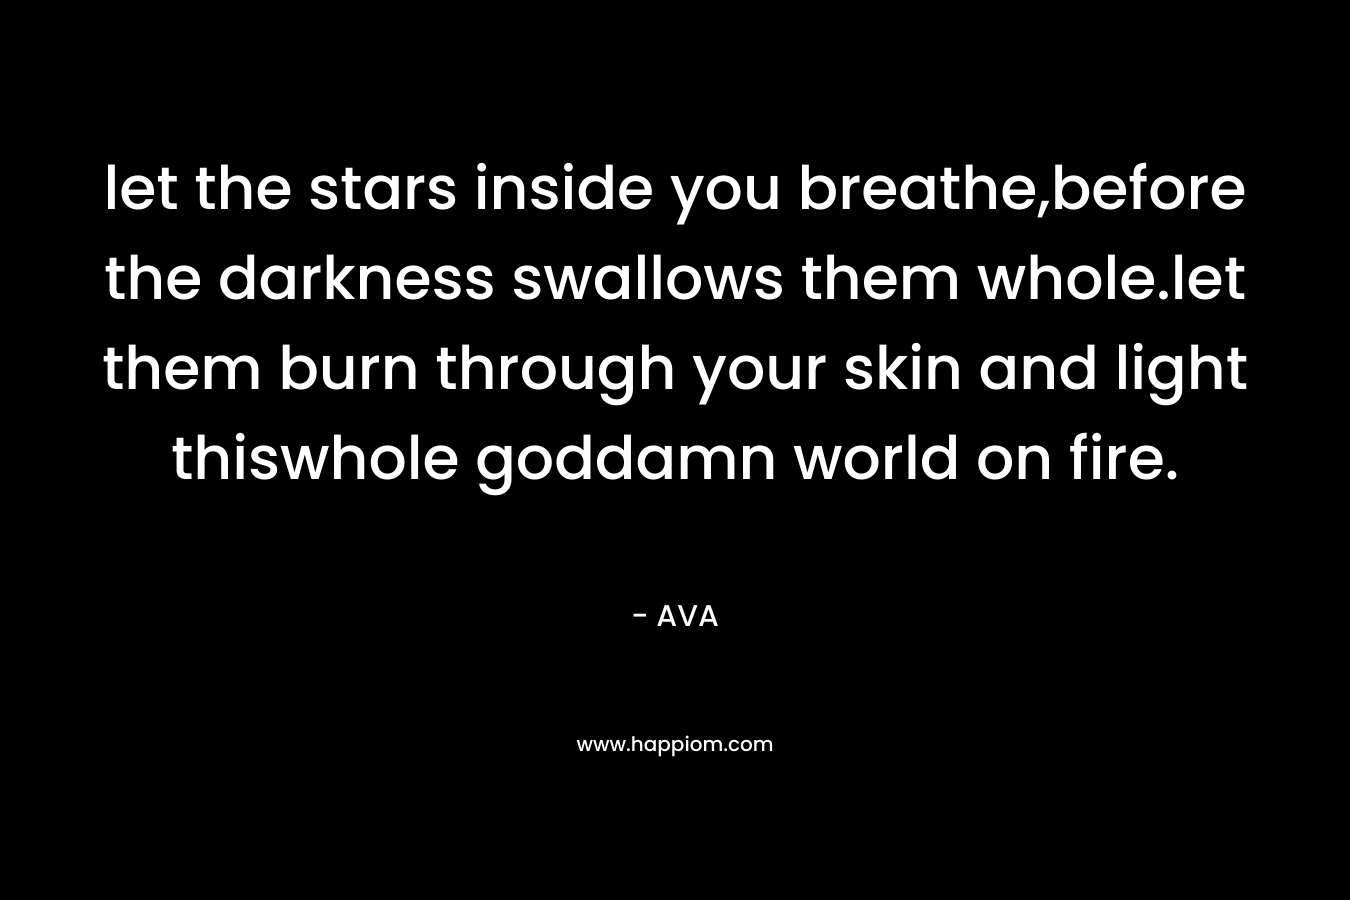 let the stars inside you breathe,before the darkness swallows them whole.let them burn through your skin and light thiswhole goddamn world on fire.